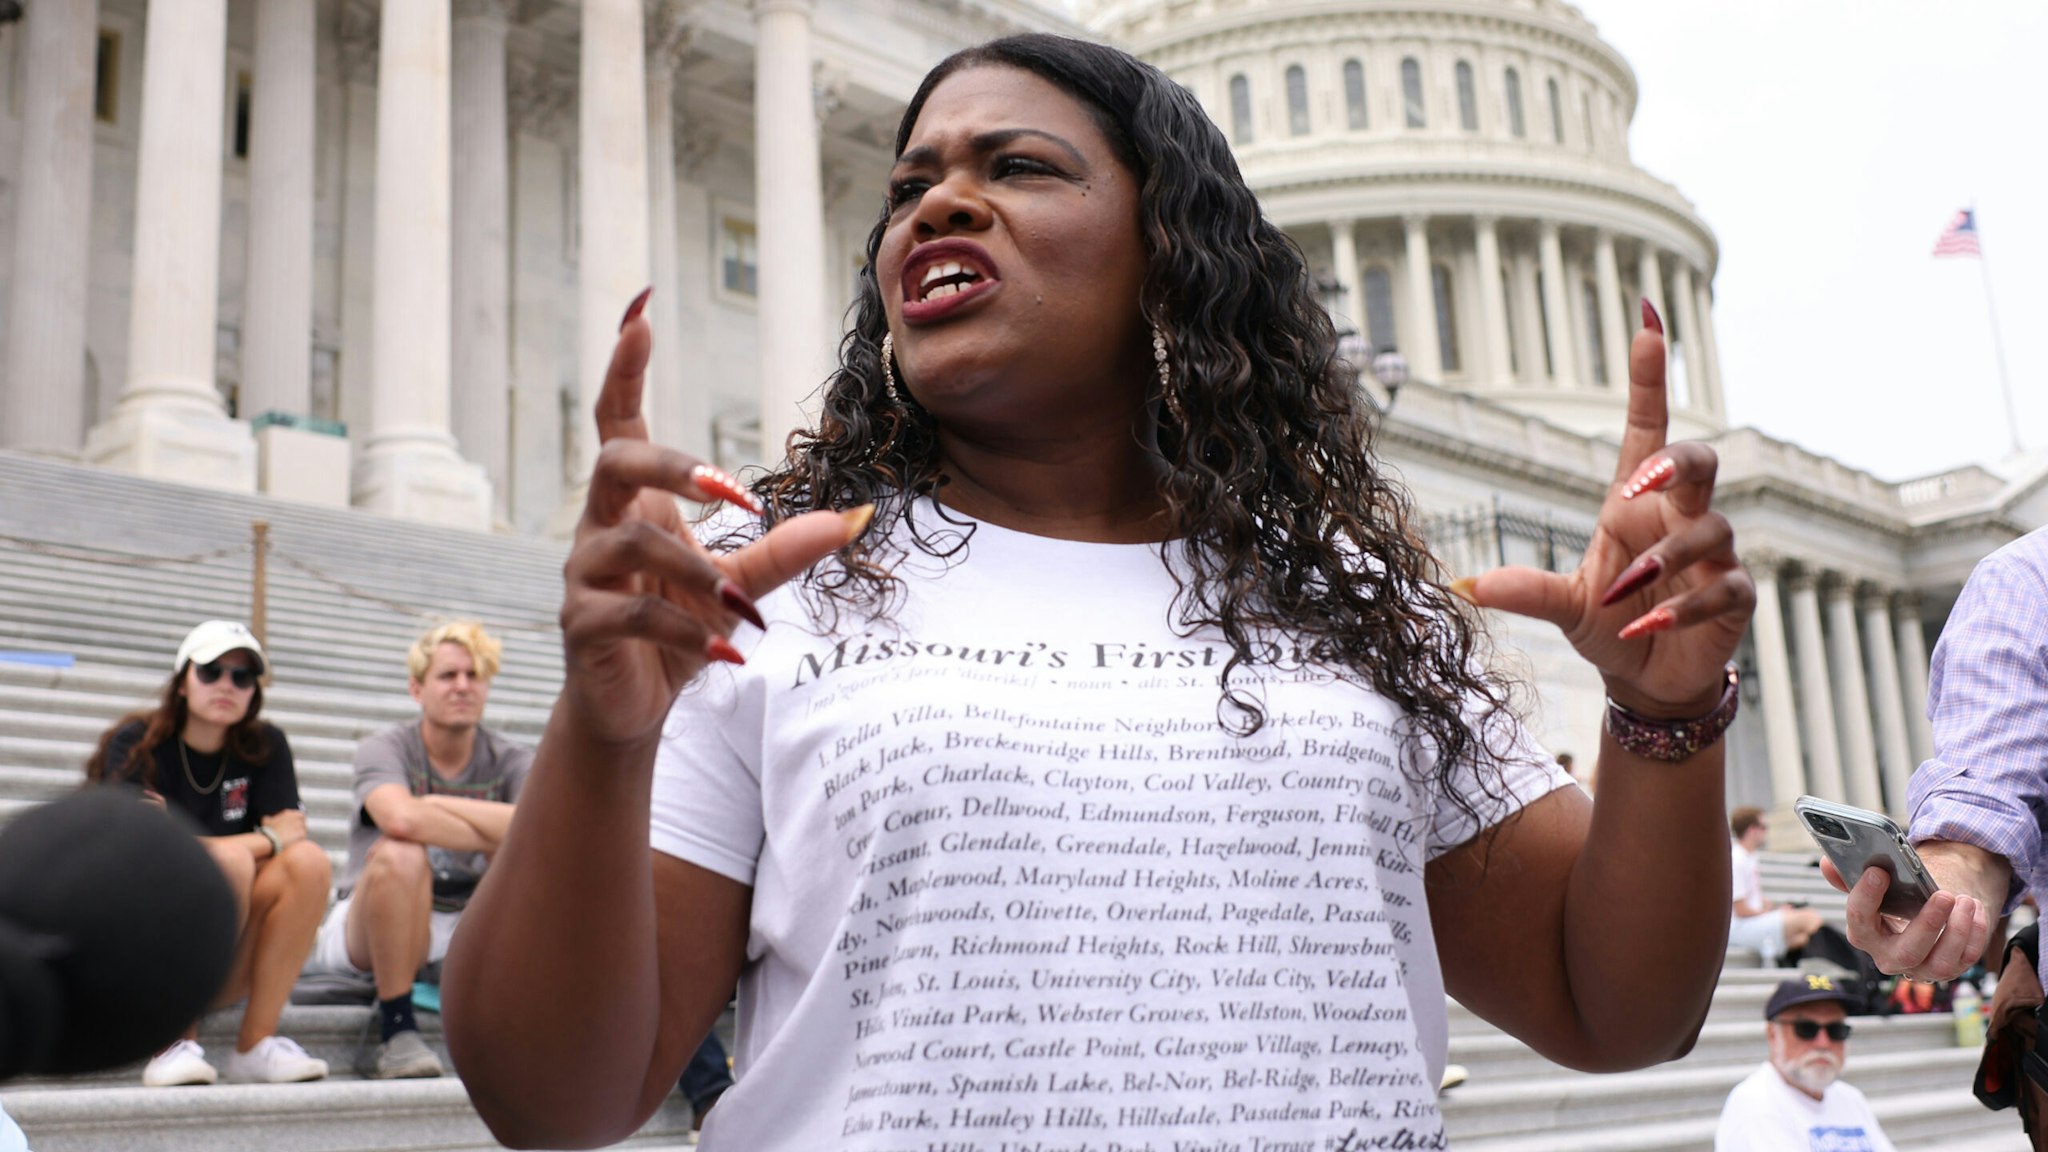 WASHINGTON, DC - AUGUST 03: Rep. Cori Bush (D-MO) speaks about the end of the eviction moratorium at the U.S. Capitol on August 03, 2021 in Washington, DC. Bush, and other Representatives, have been sleeping on and occupying the House steps in protest of their House colleagues adjourning for August recess without passing an extension of the eviction moratorium.